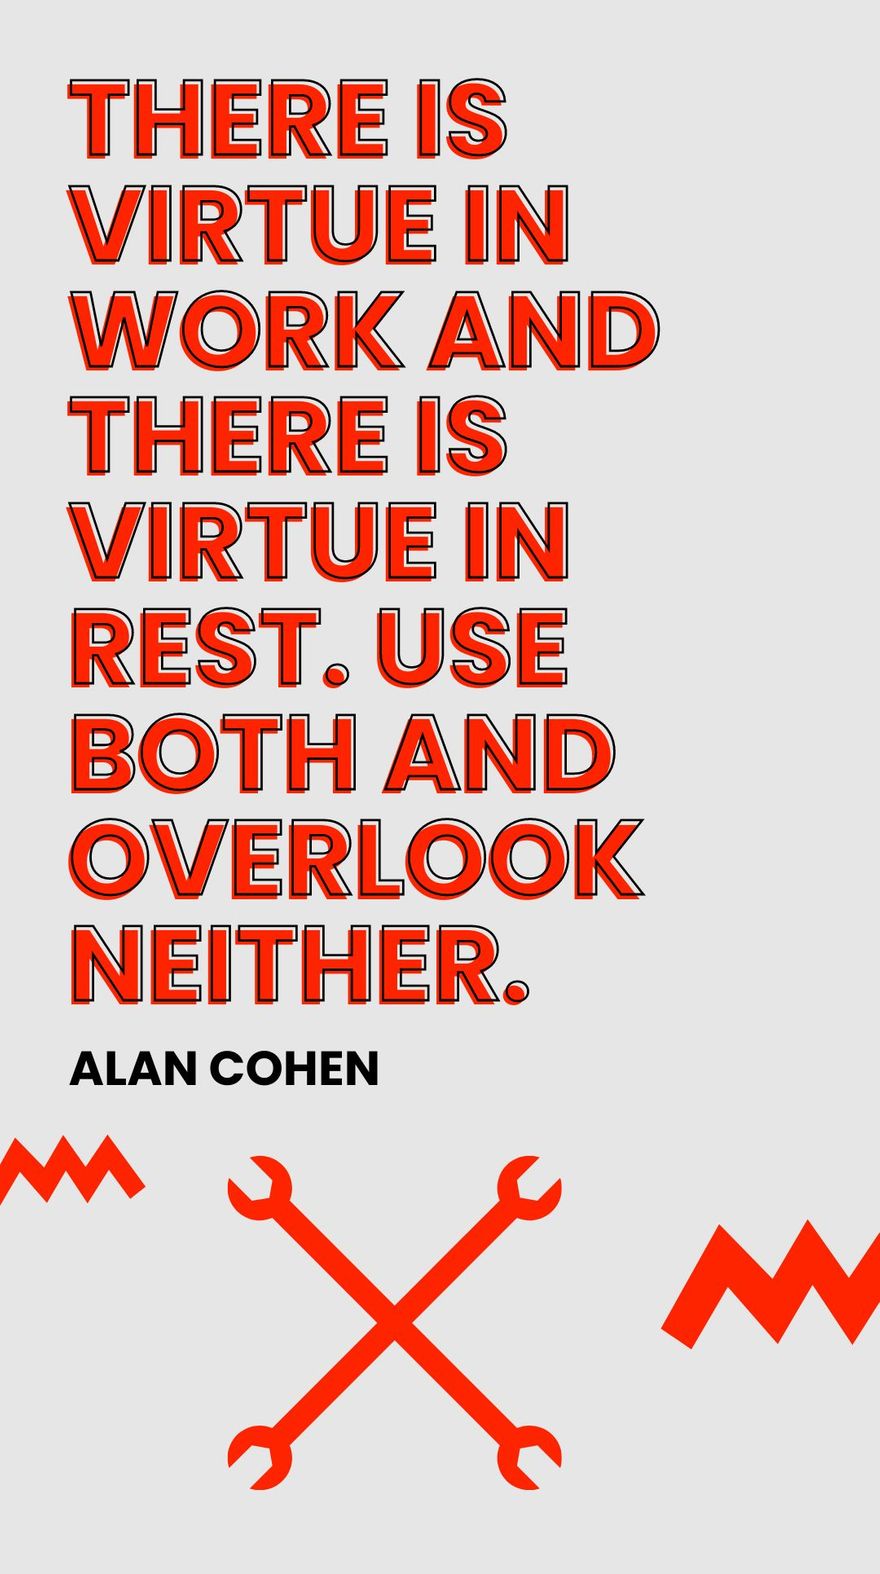 Free Alan Cohen - There is virtue in work and there is virtue in rest. Use both and overlook neither. in JPG